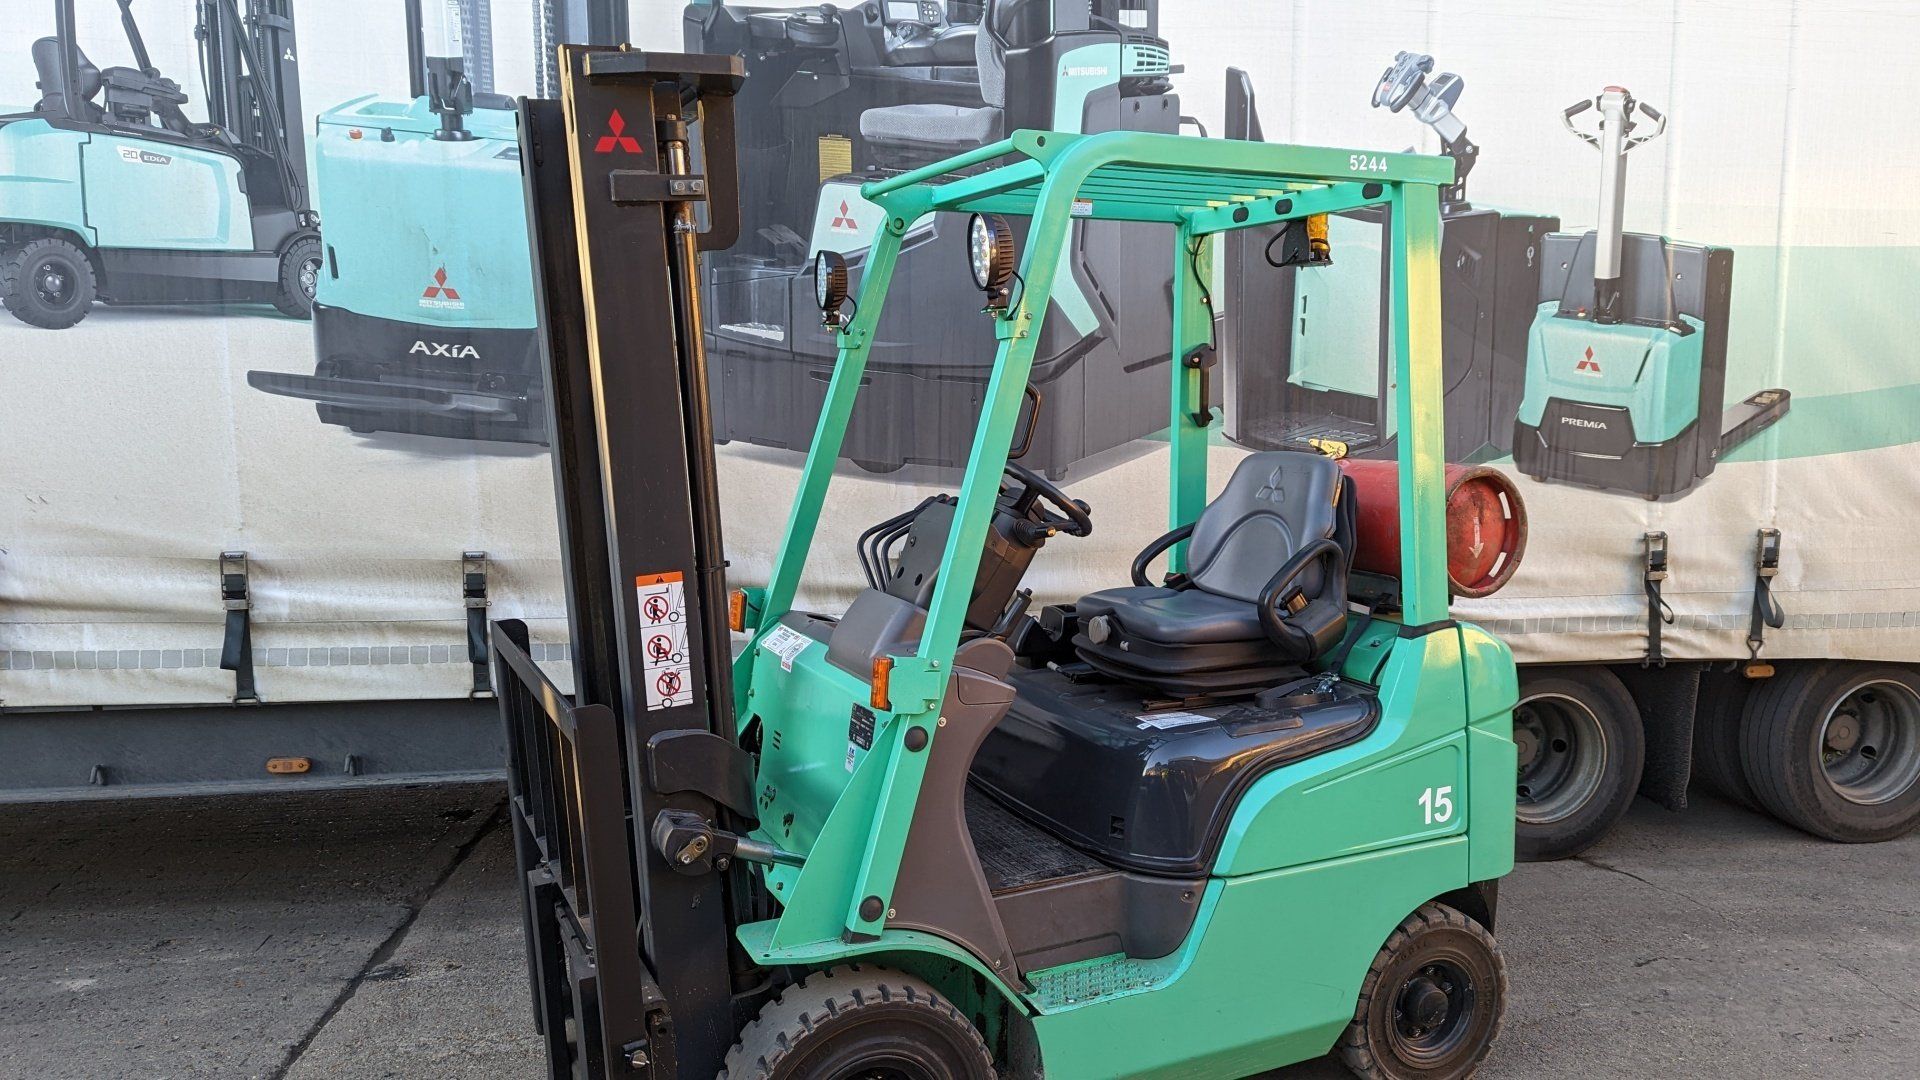 A green forklift is parked in front of a truck.